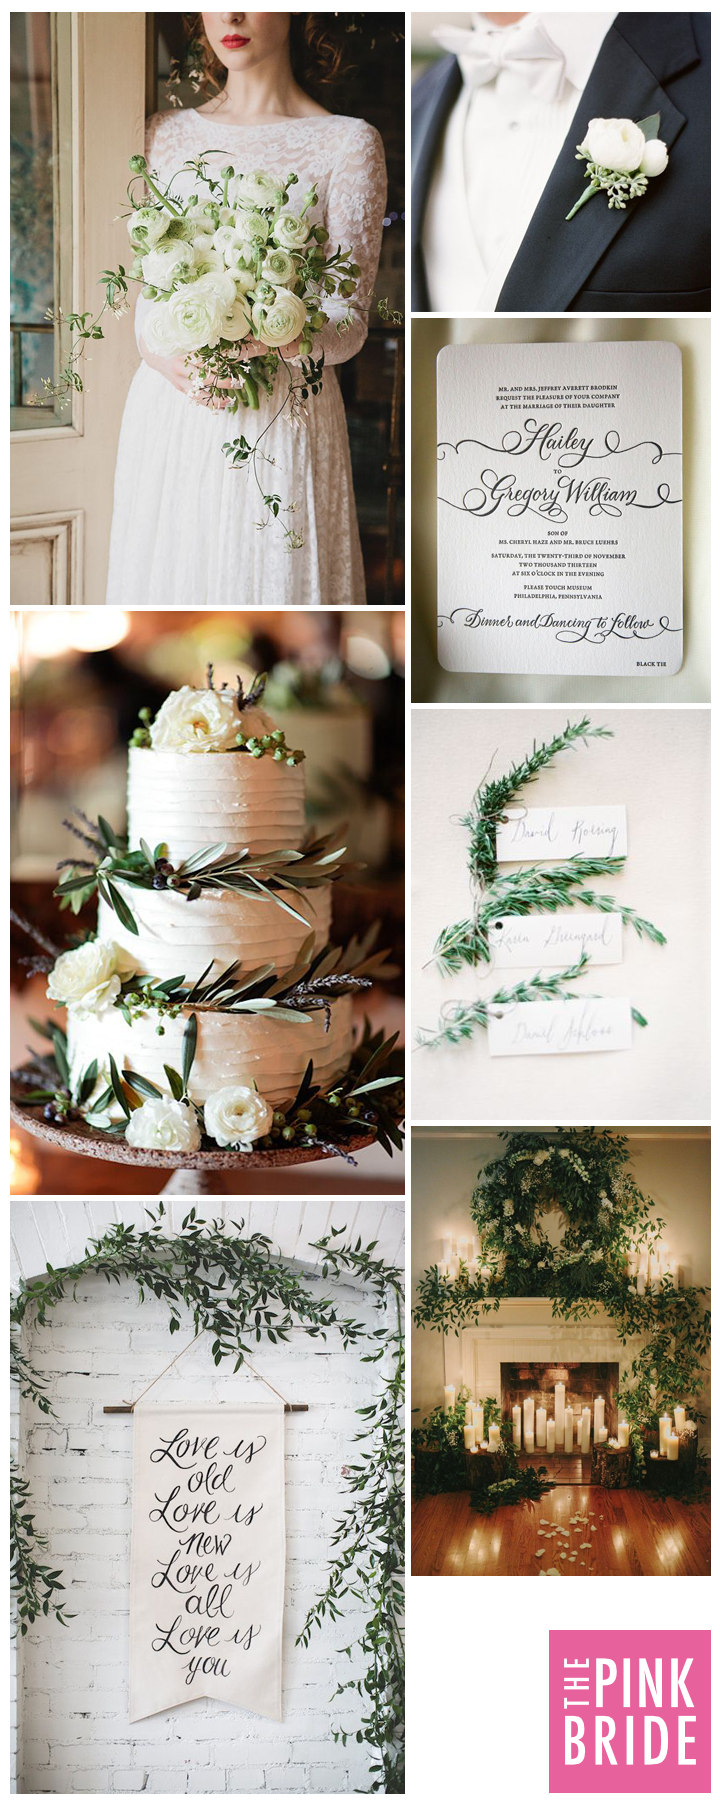 Wedding ideas with the color white: wedding color palette inspiration board 